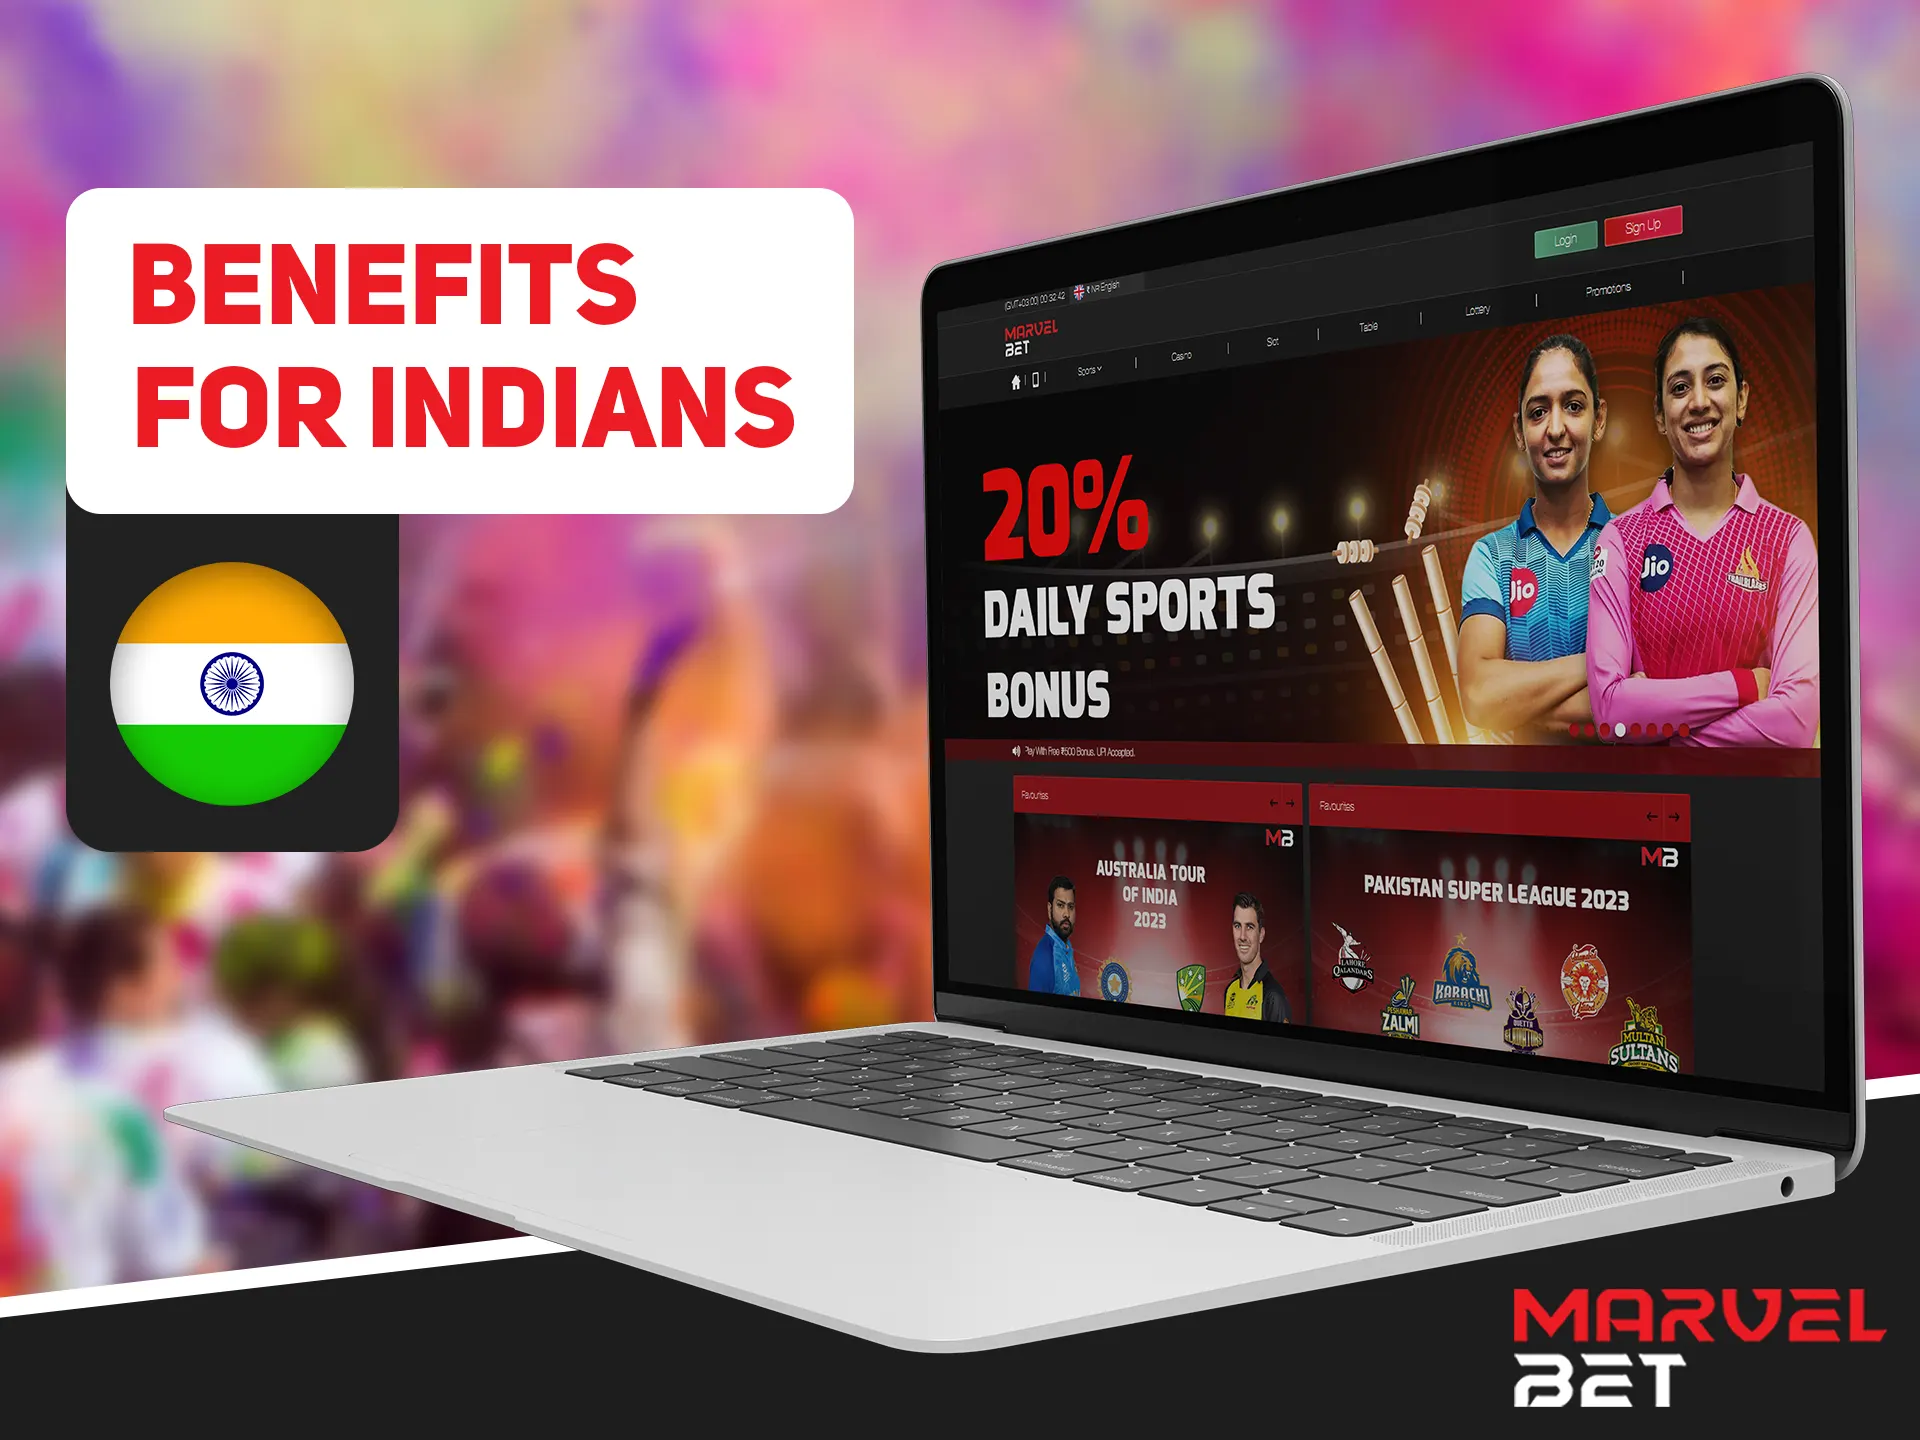 Get additional Marvelbet bonuses if you bet from India.